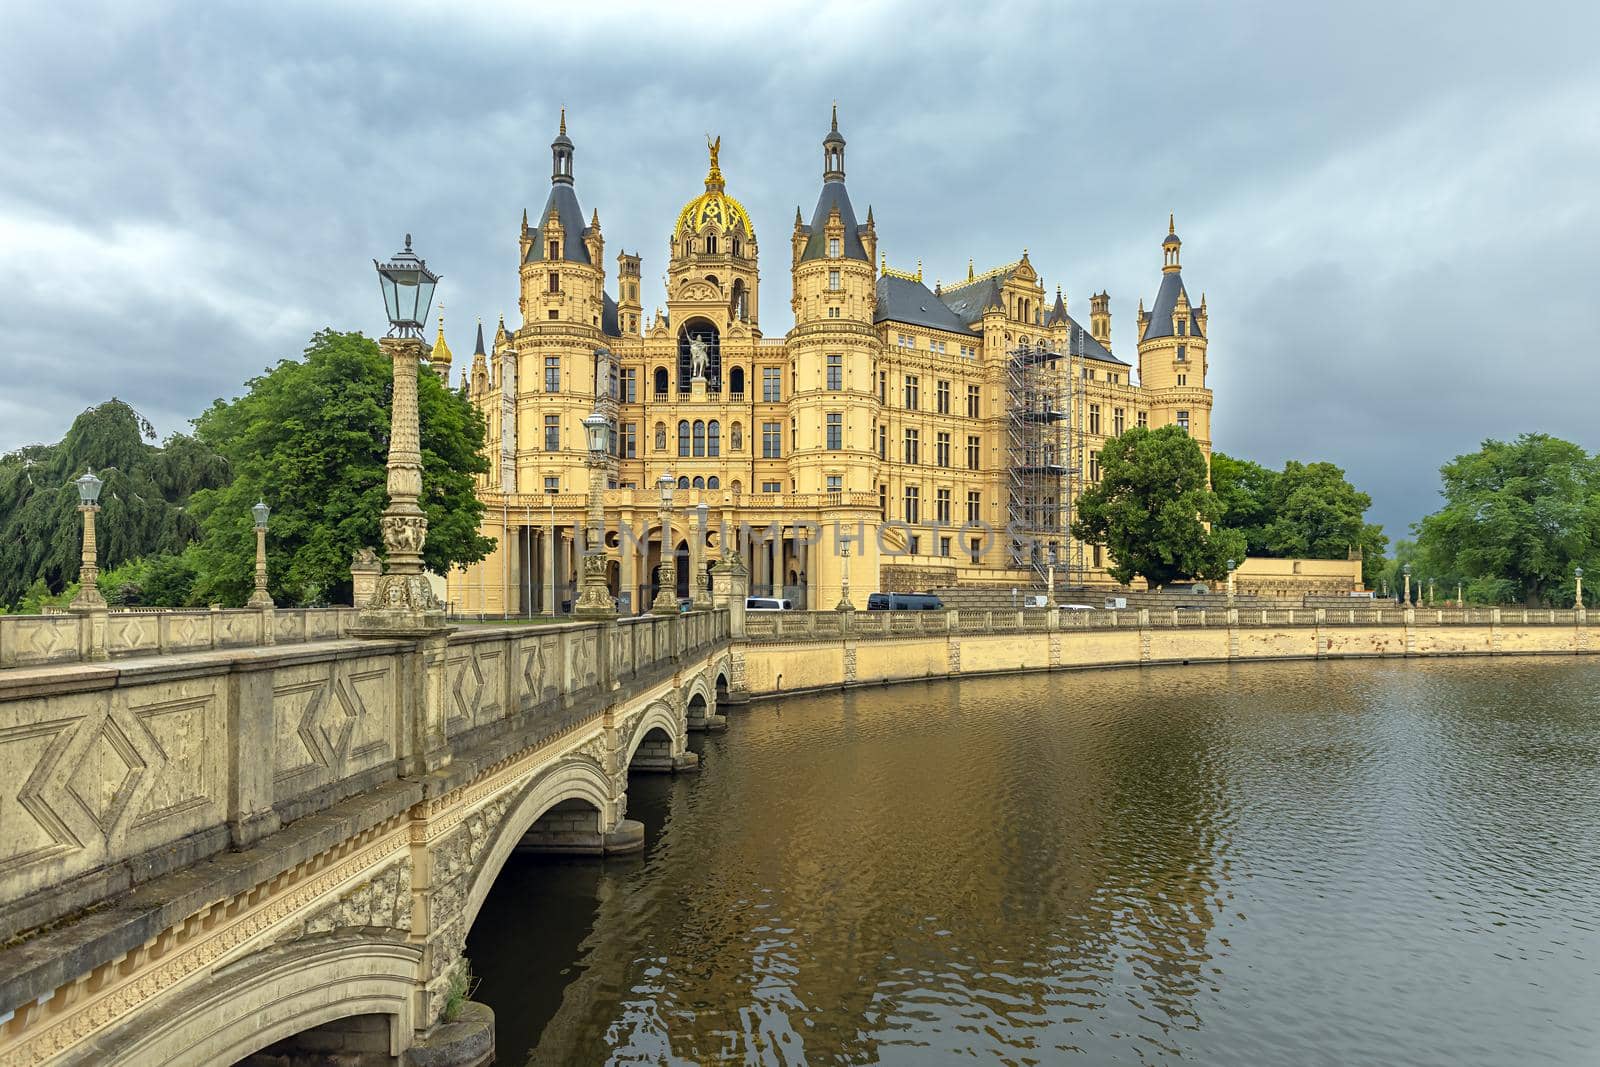 Schwerin Palace, in the city of Schwerin the capital of Mecklenburg-Vorpommern, Germany  by seka33